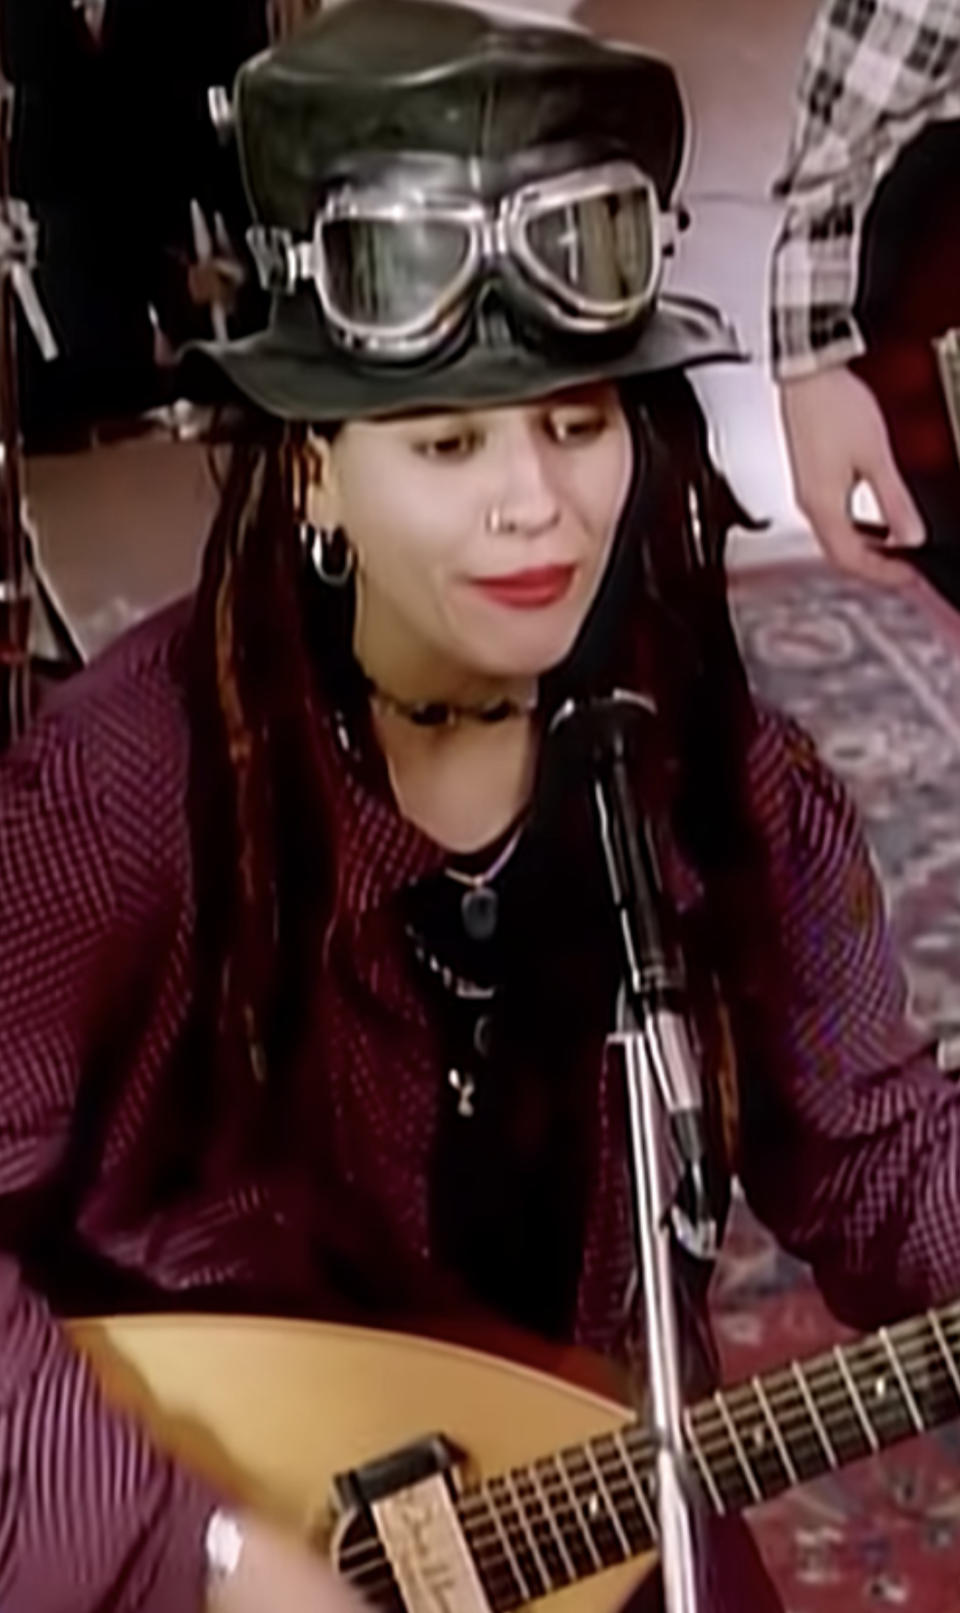 Perry in 4 Non Blondes' "What's Up?" music video